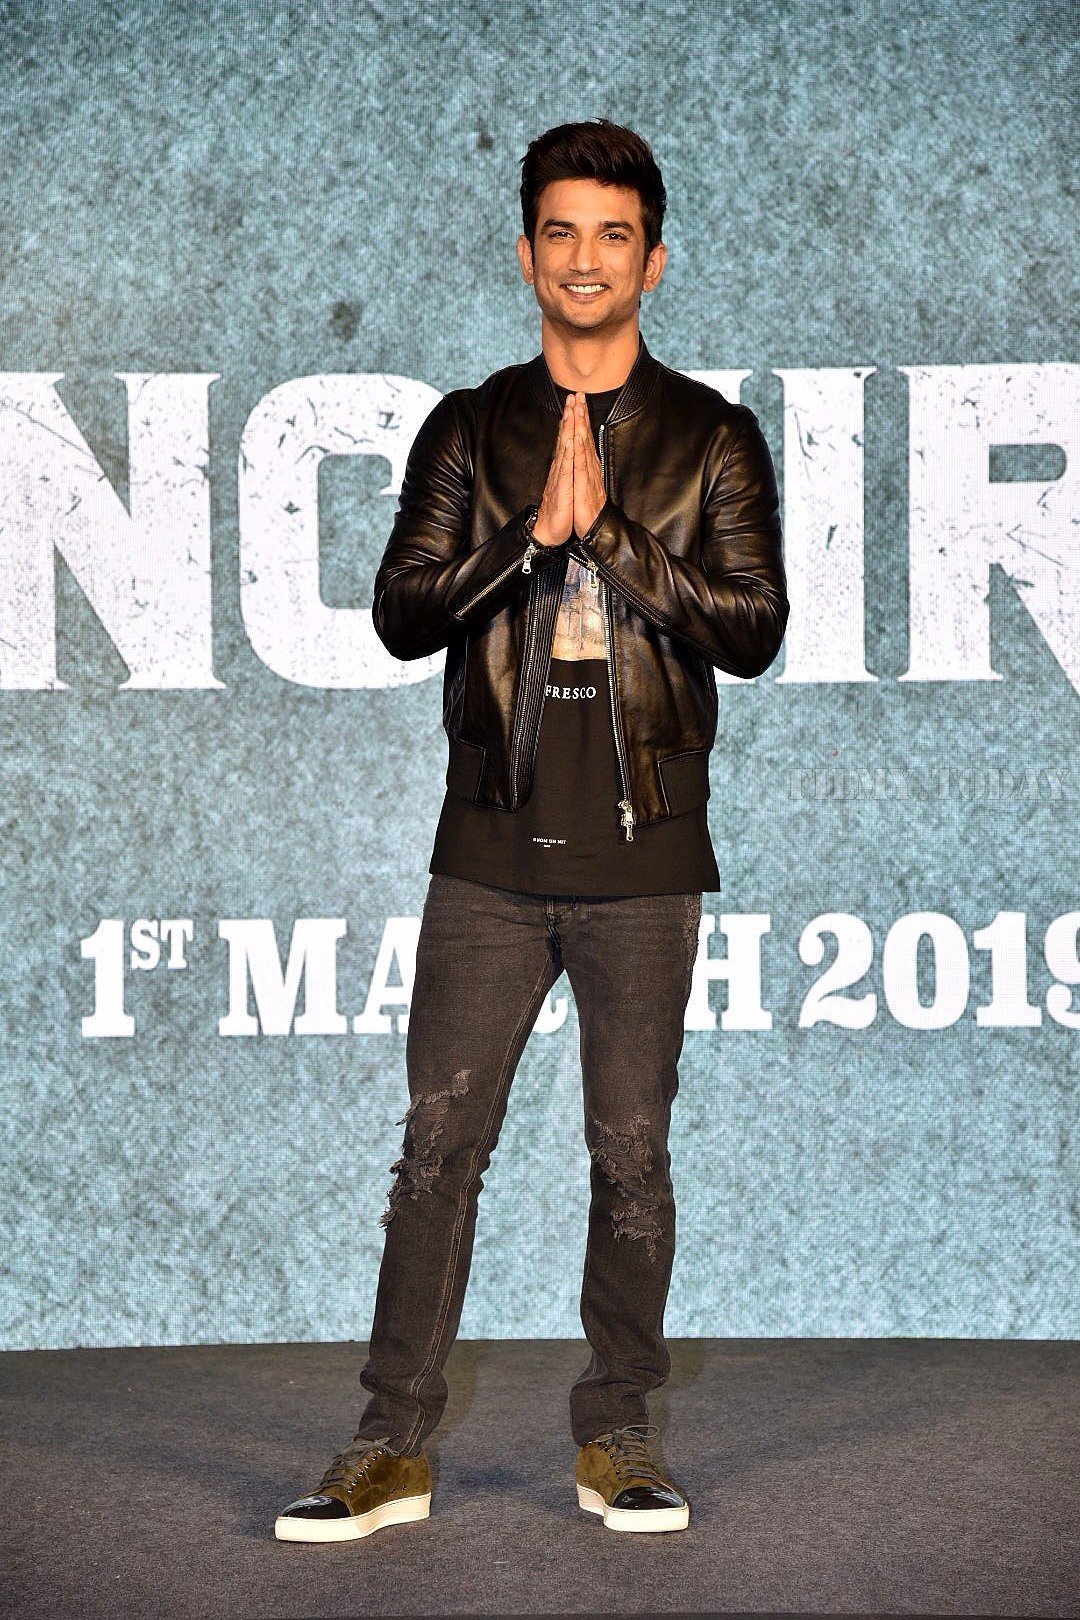 Sushant Singh Rajput - Photos: Press Conference Of Sonchiraiya | Picture 1625393